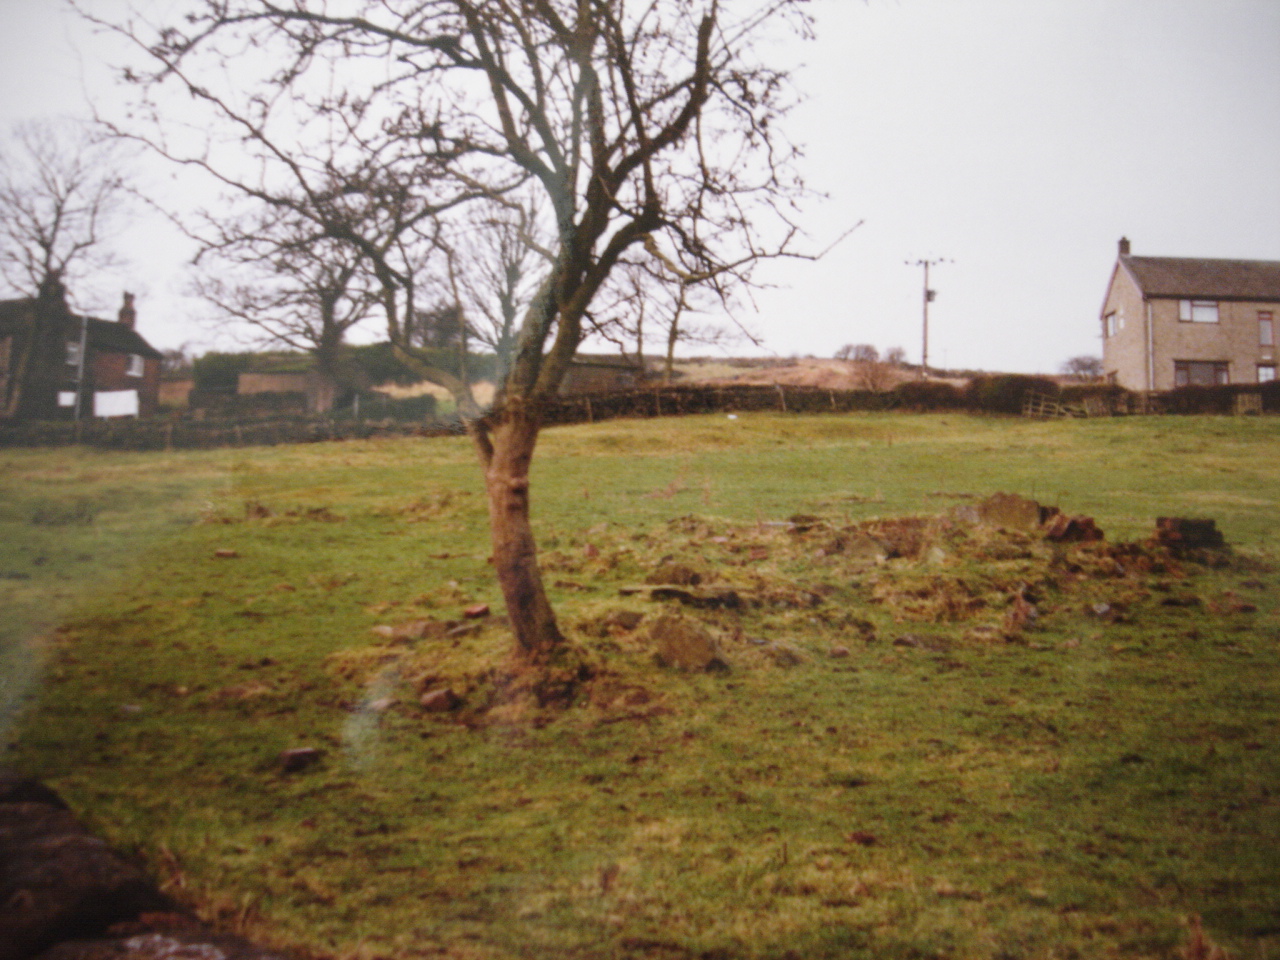 Remains of Stanley Farm